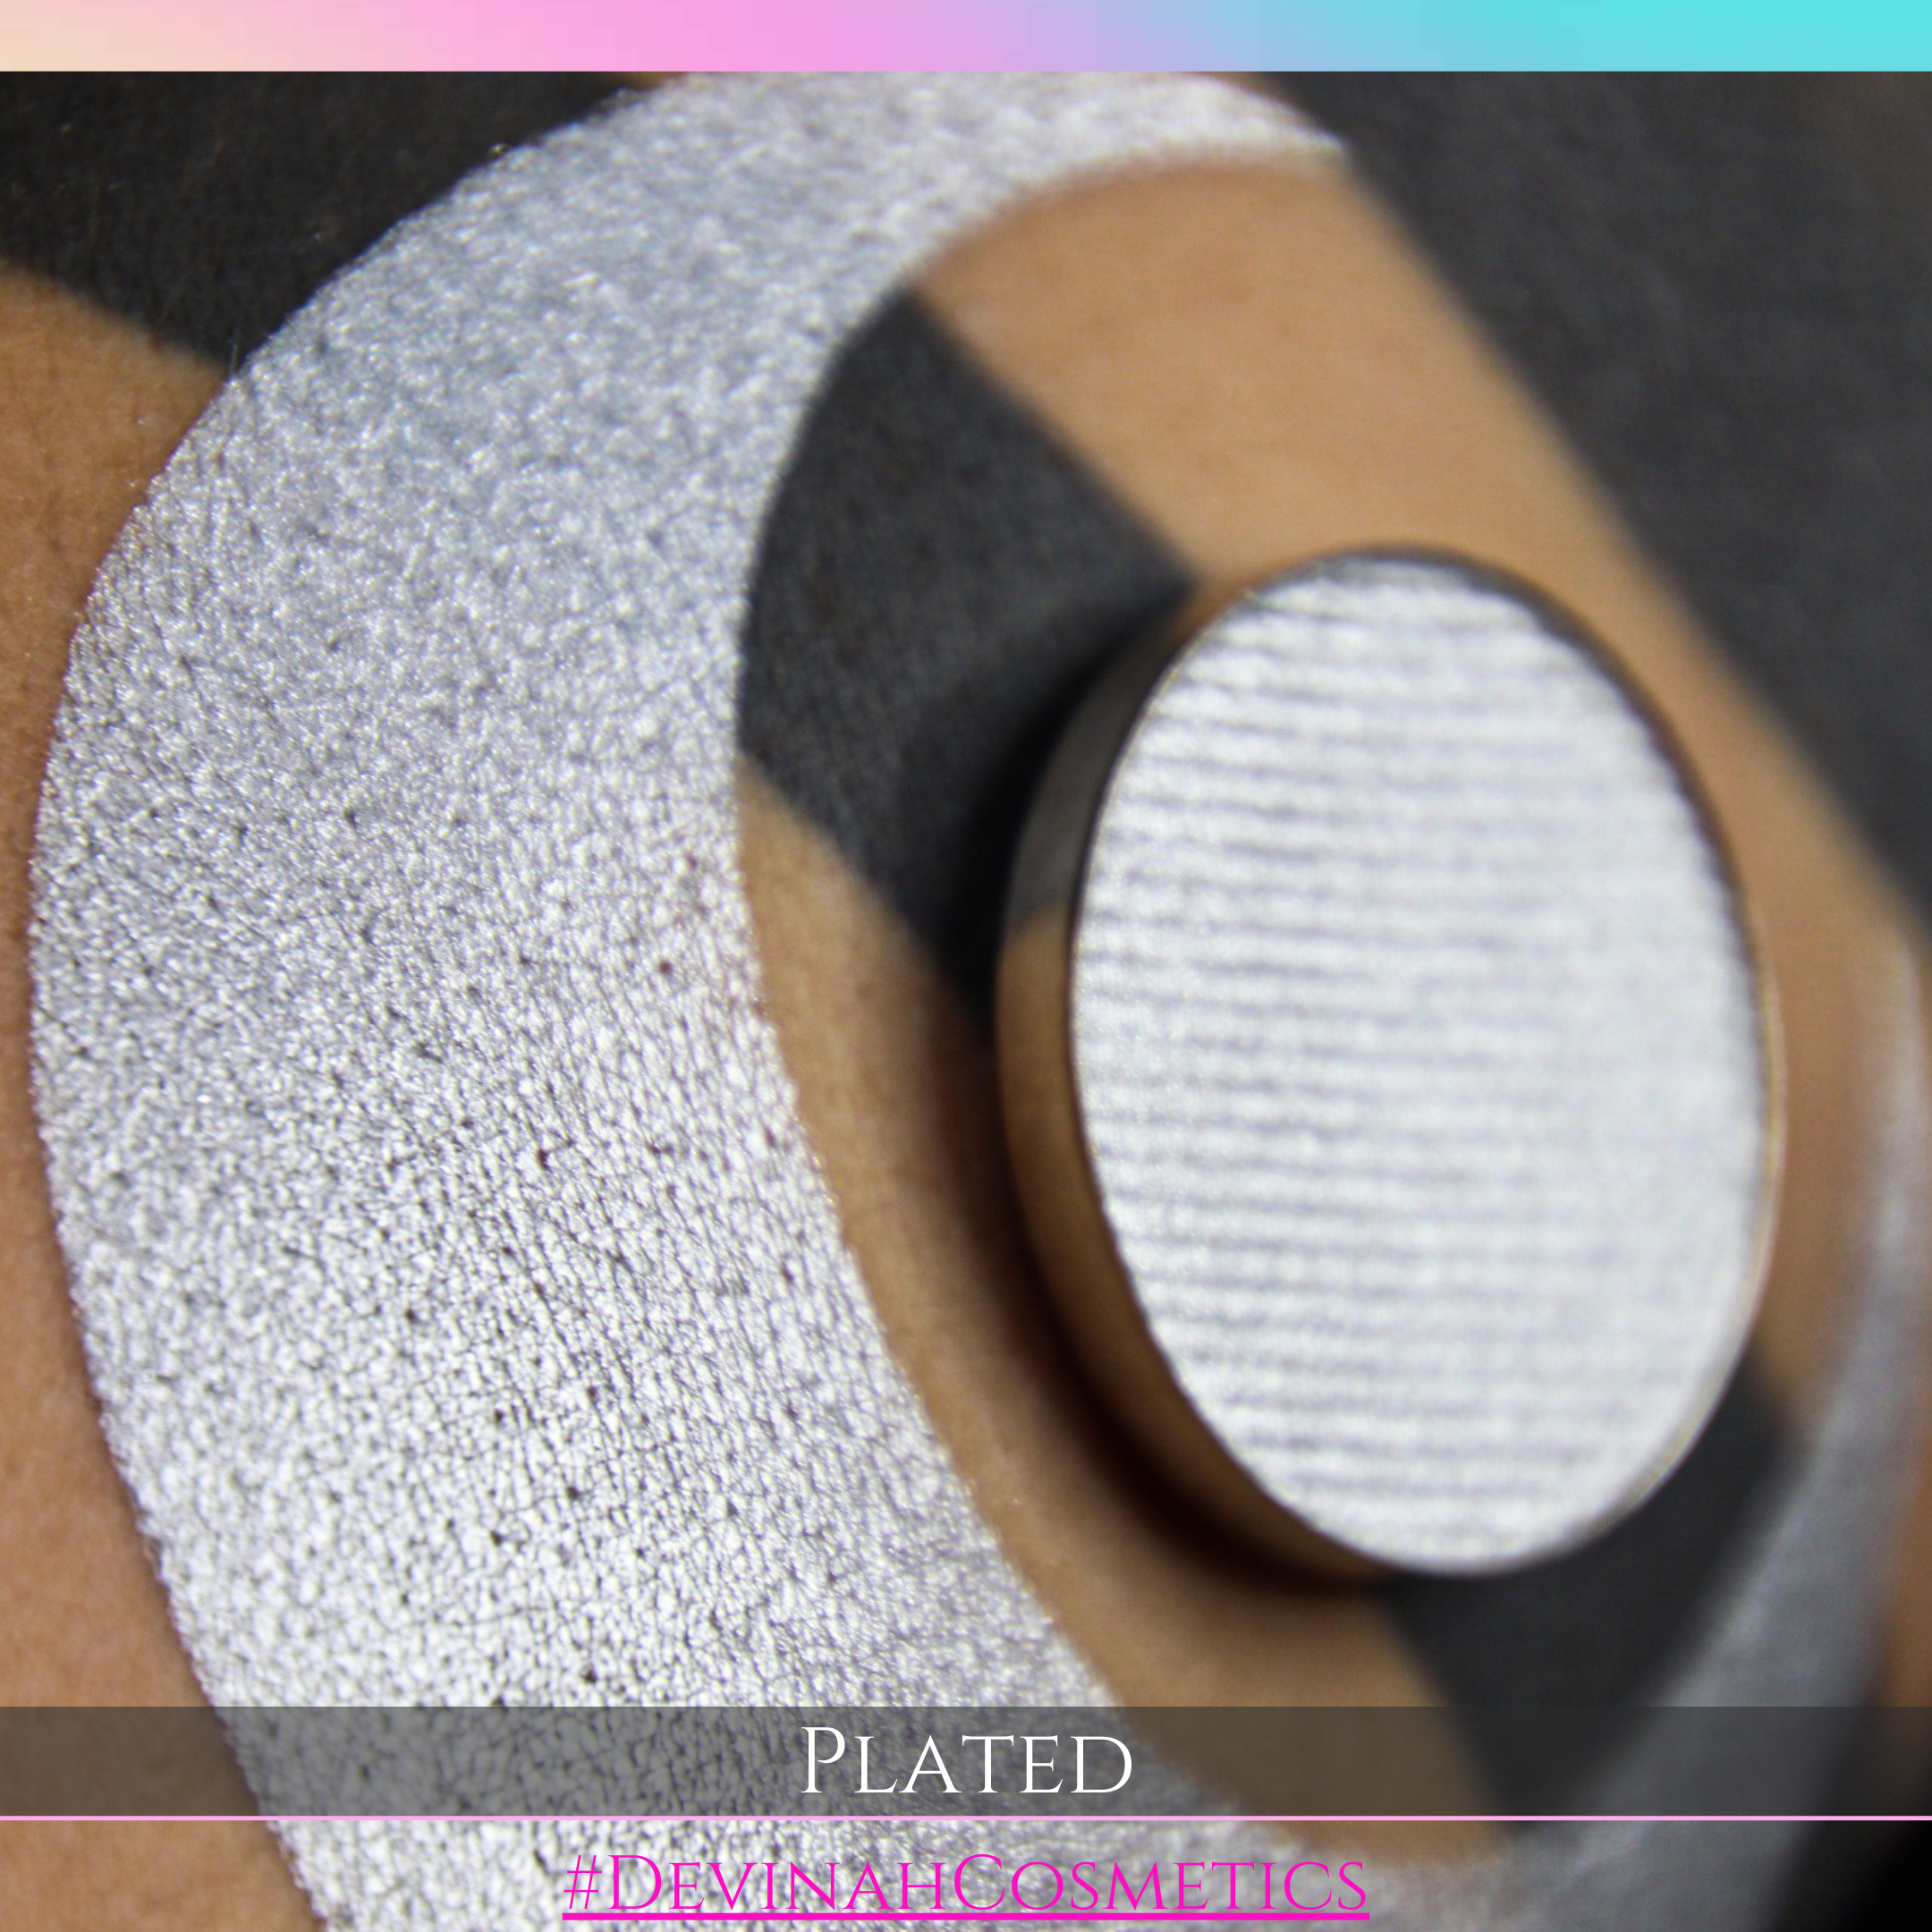 PLATED Pressed Pigment